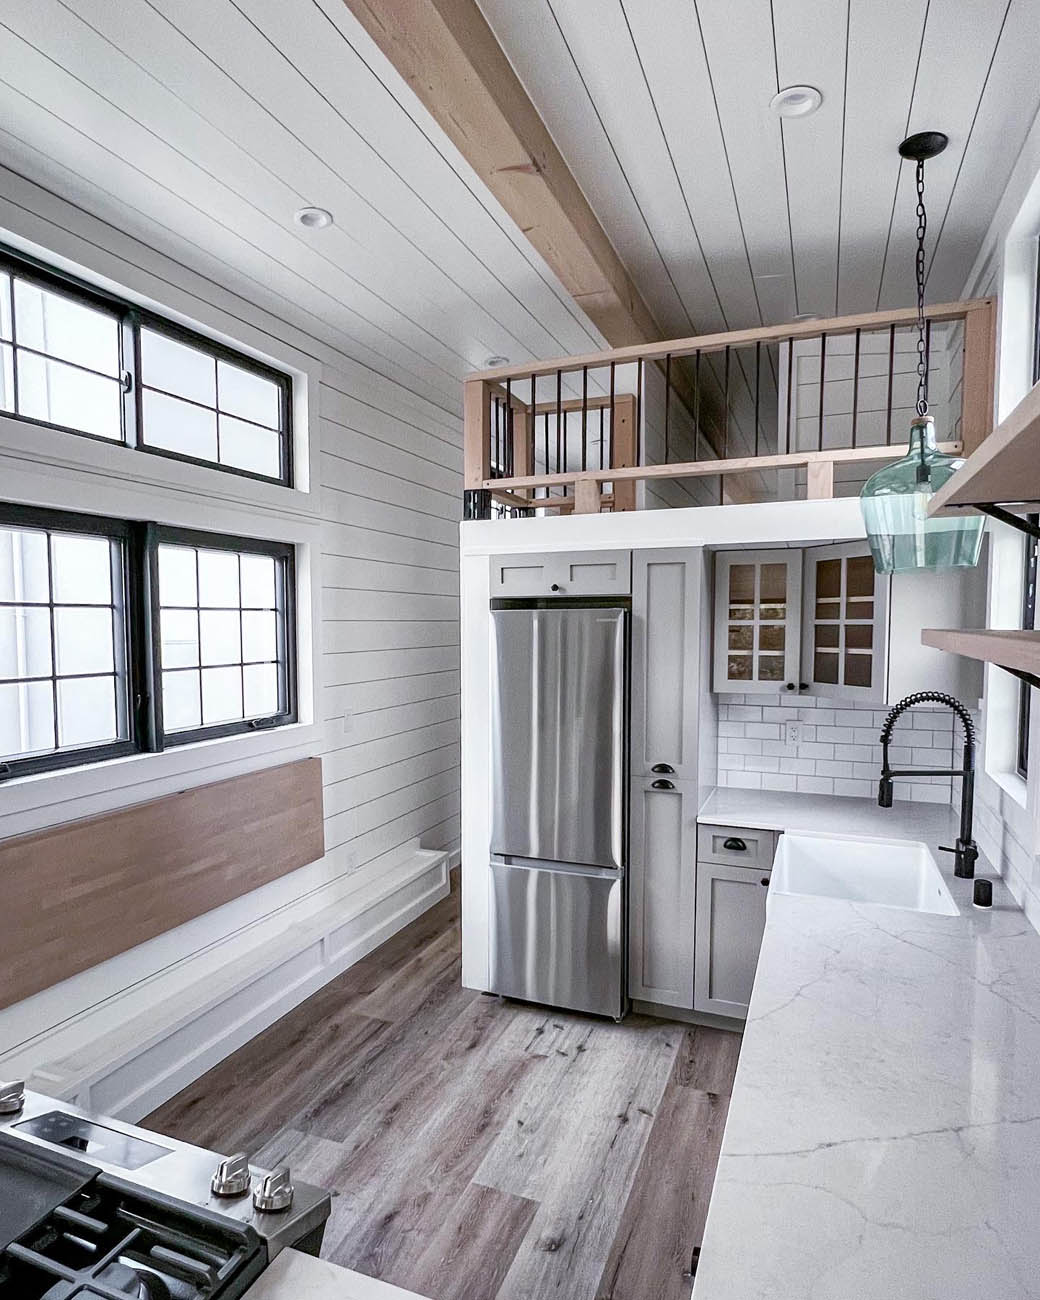 Inside a tiny ADU kitchen with a bedding loft, provided by Anchored Tiny Homes custom small home builder in Oklahoma City.